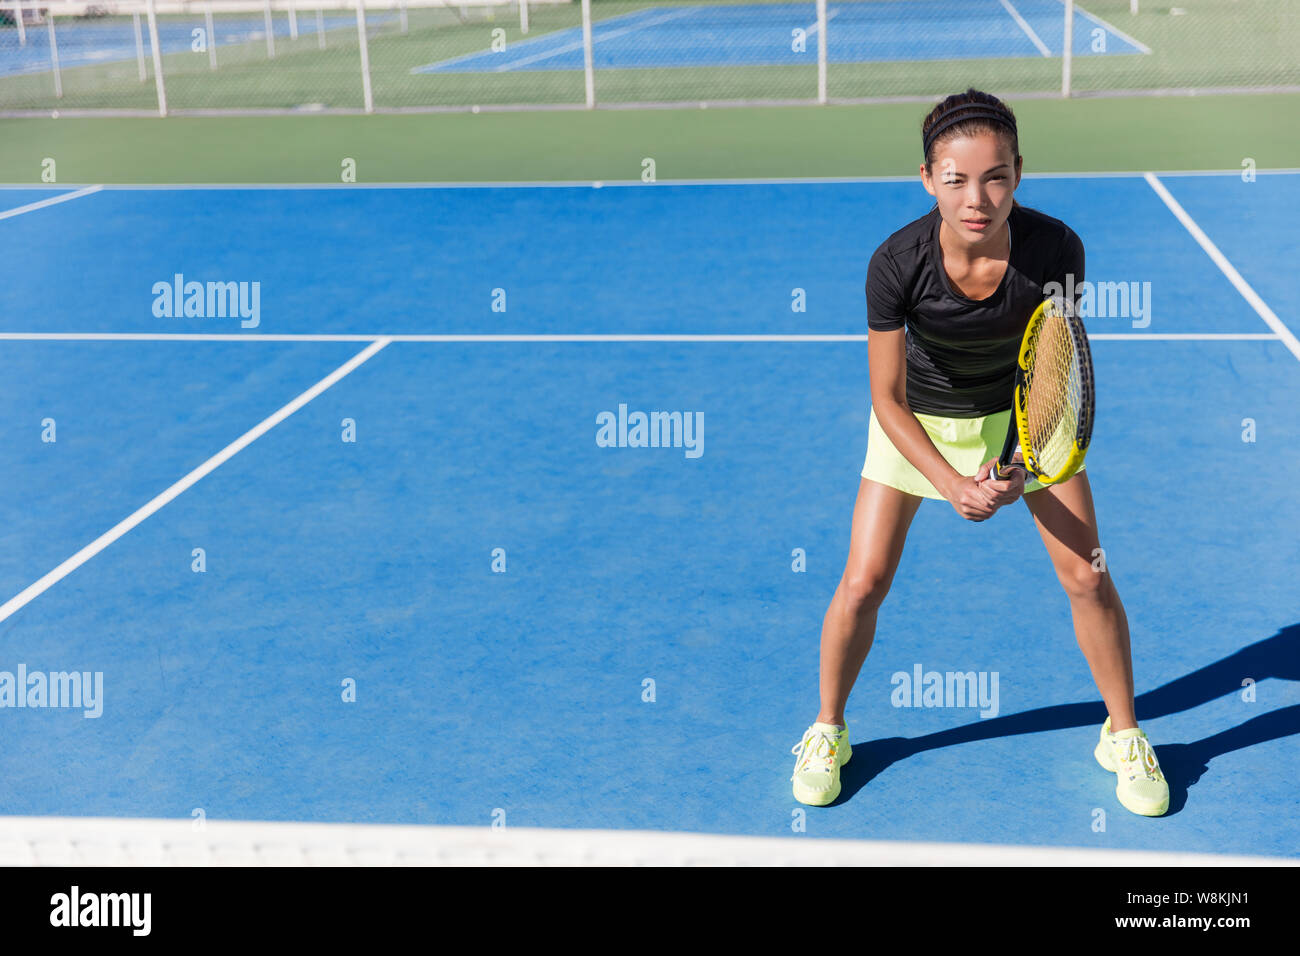 Asian tennis player woman ready to play on blue hard court outdoor in summer in position holding racket wearing outfit with skirt and shoes. Female athlete determination and concentration concept. Stock Photo